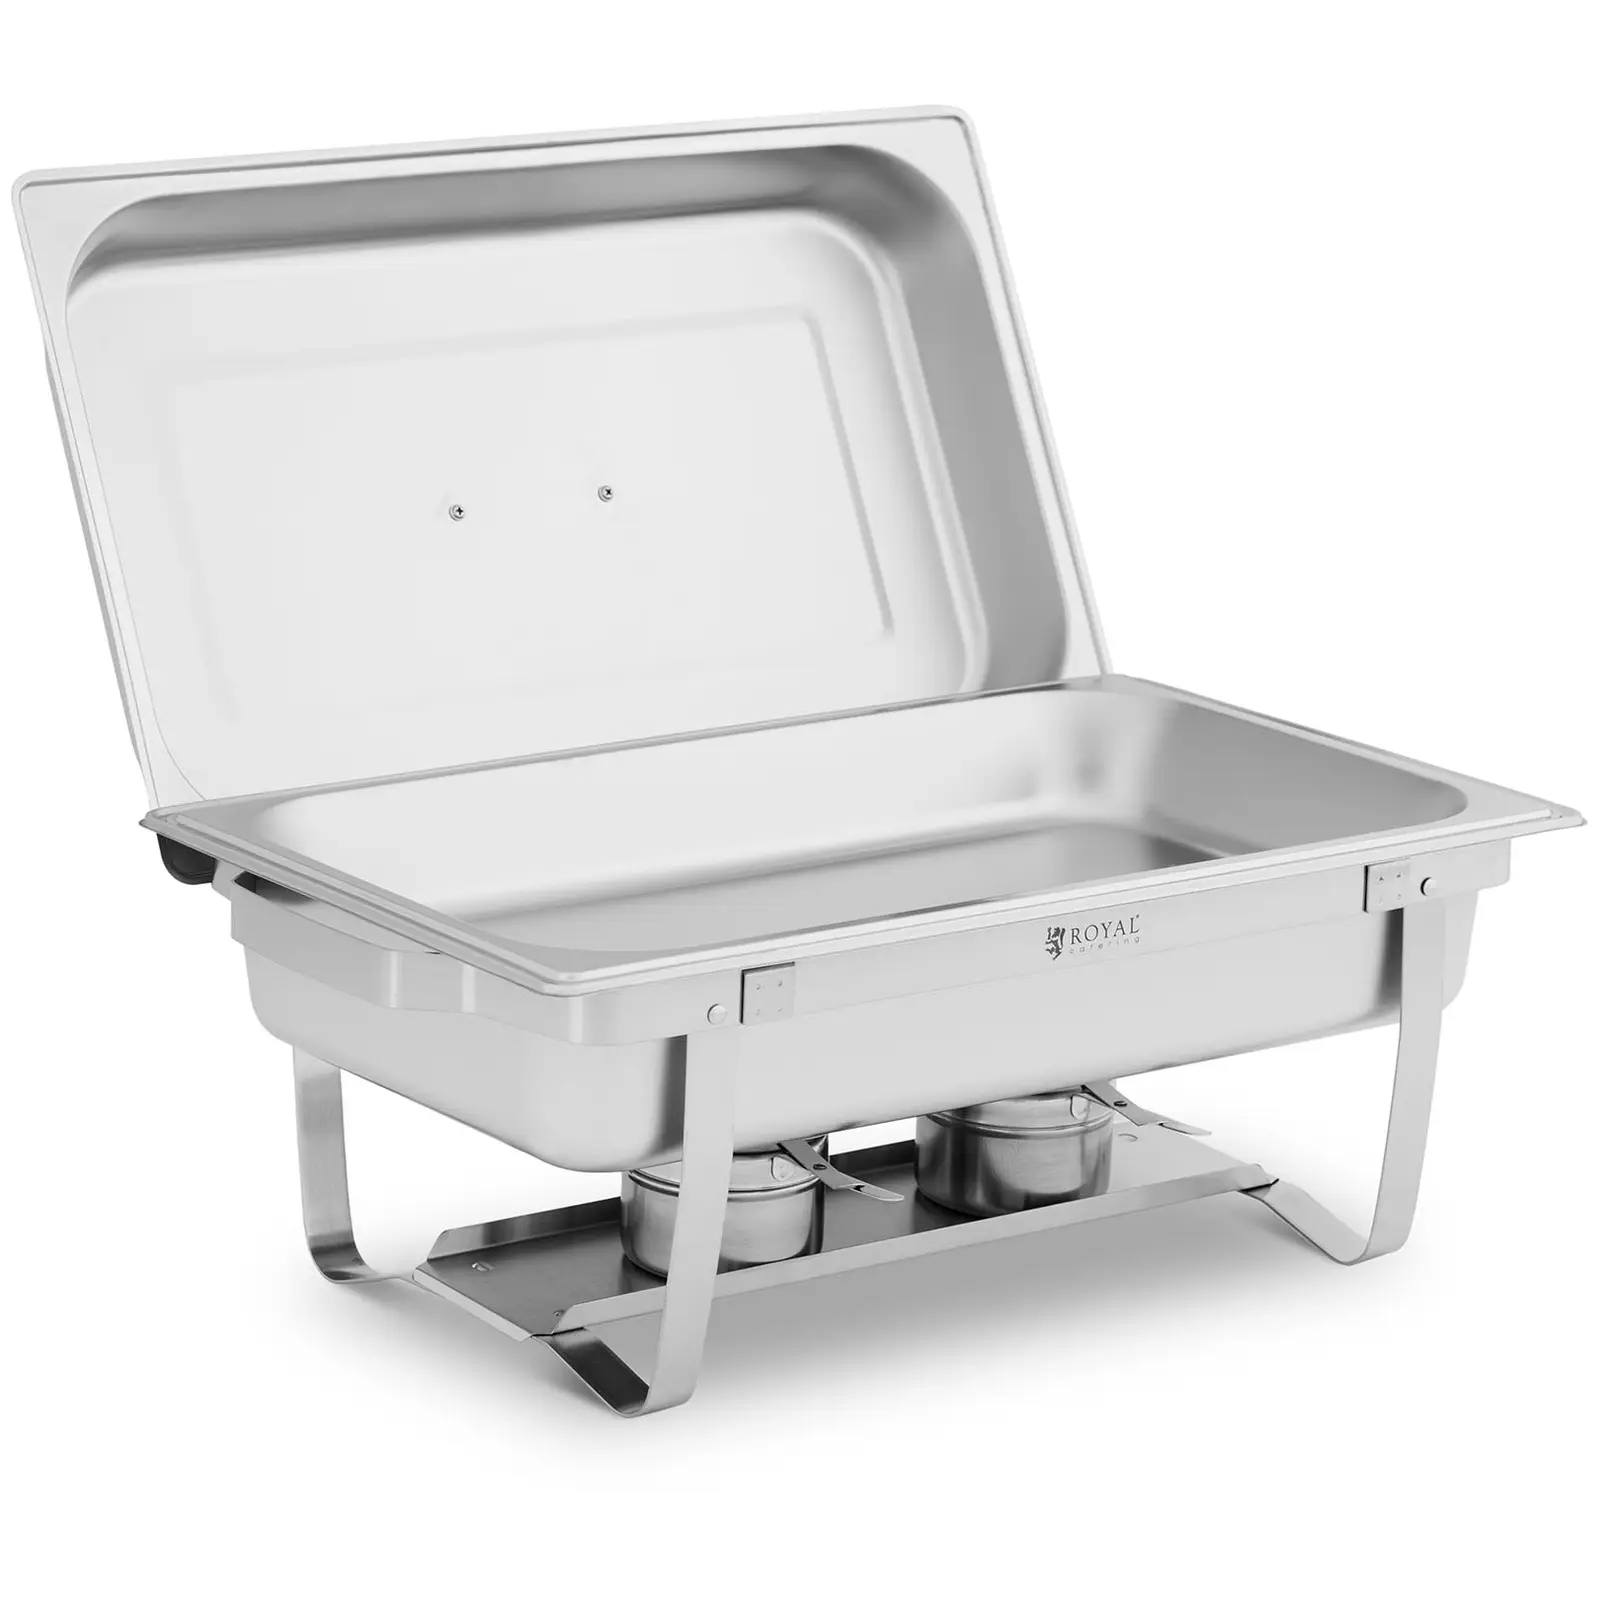 Chafing dish - GN 1/1 - 9 l - 2 brændere - 500 x 300 x 60 mm - Royal Catering